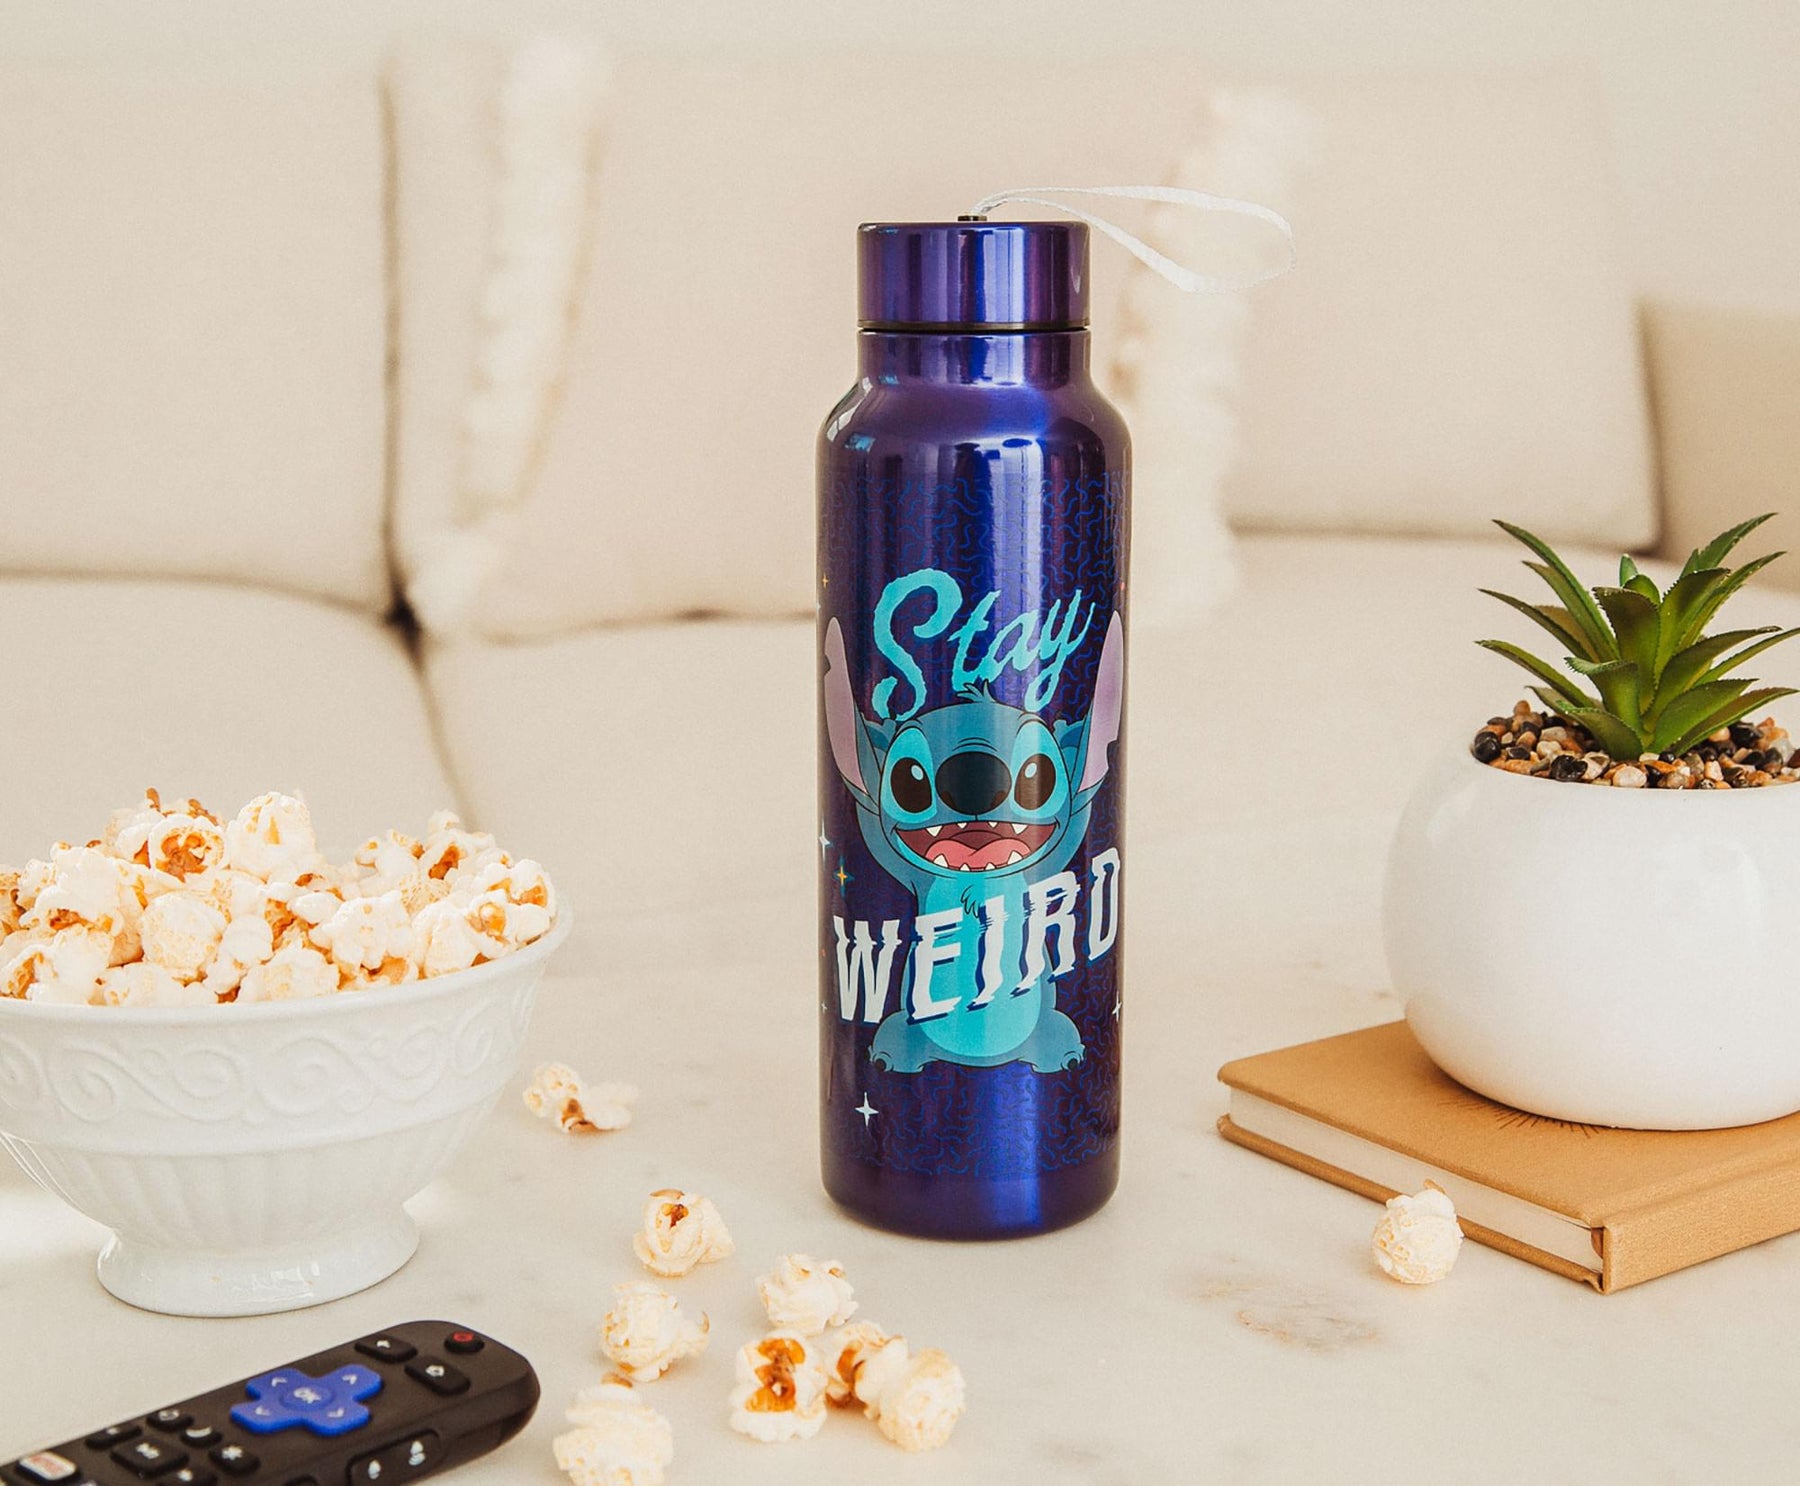 Disney Lilo & Stitch "Stay Weird" Stainless Steel Water Bottle | 27 Ounces